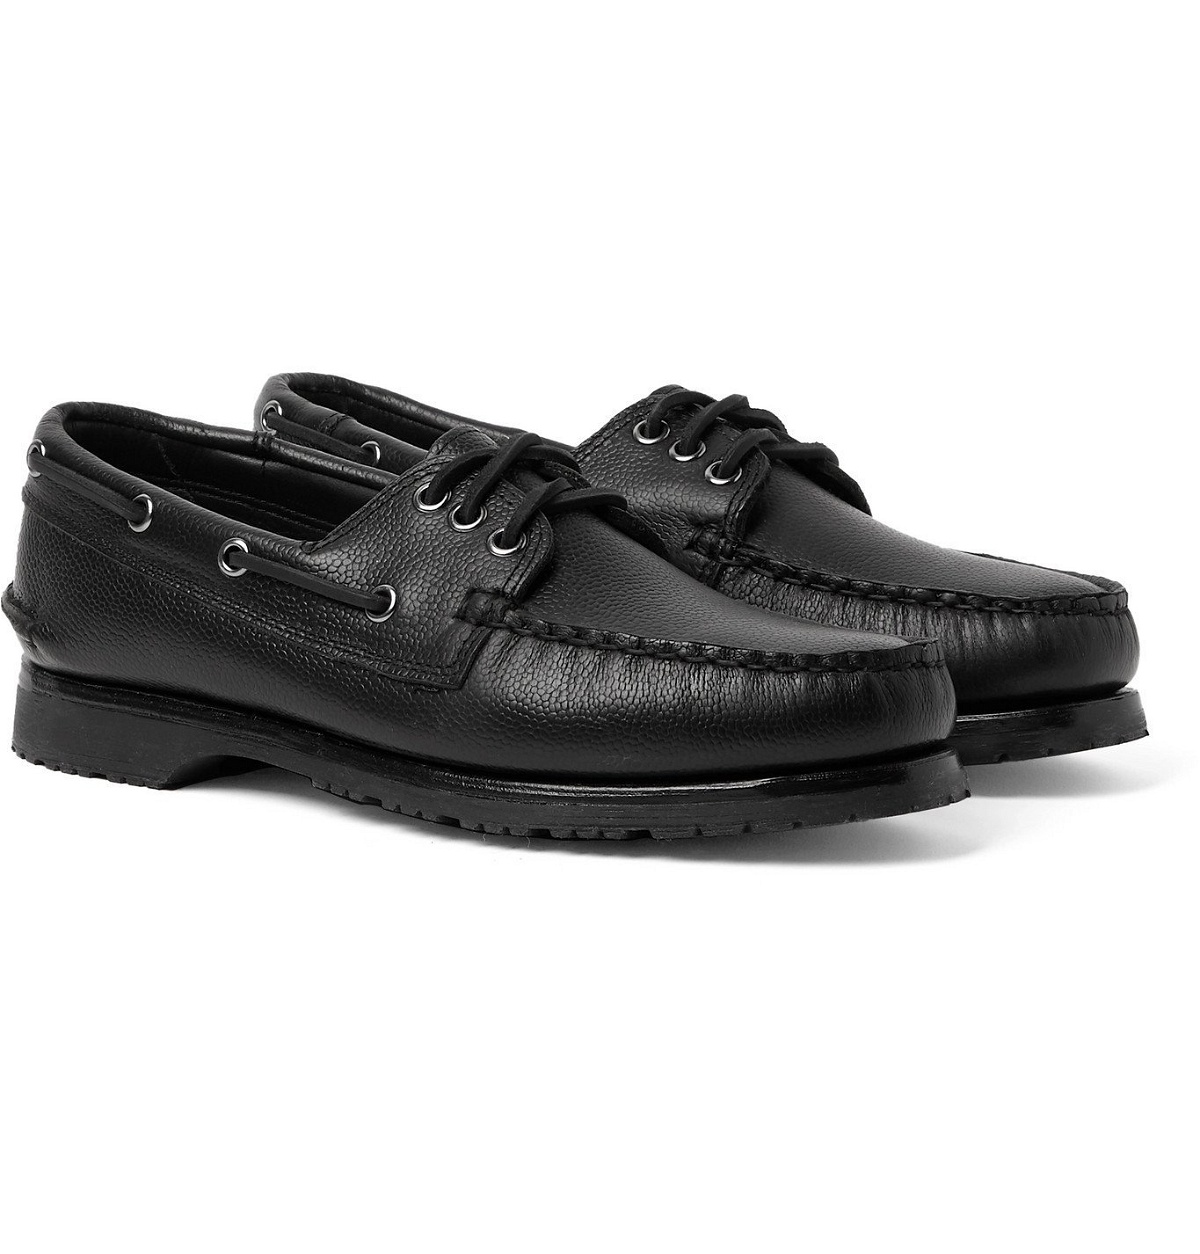 Quoddy - Downeast Full-Grain Leather Boat Shoes - Black Quoddy